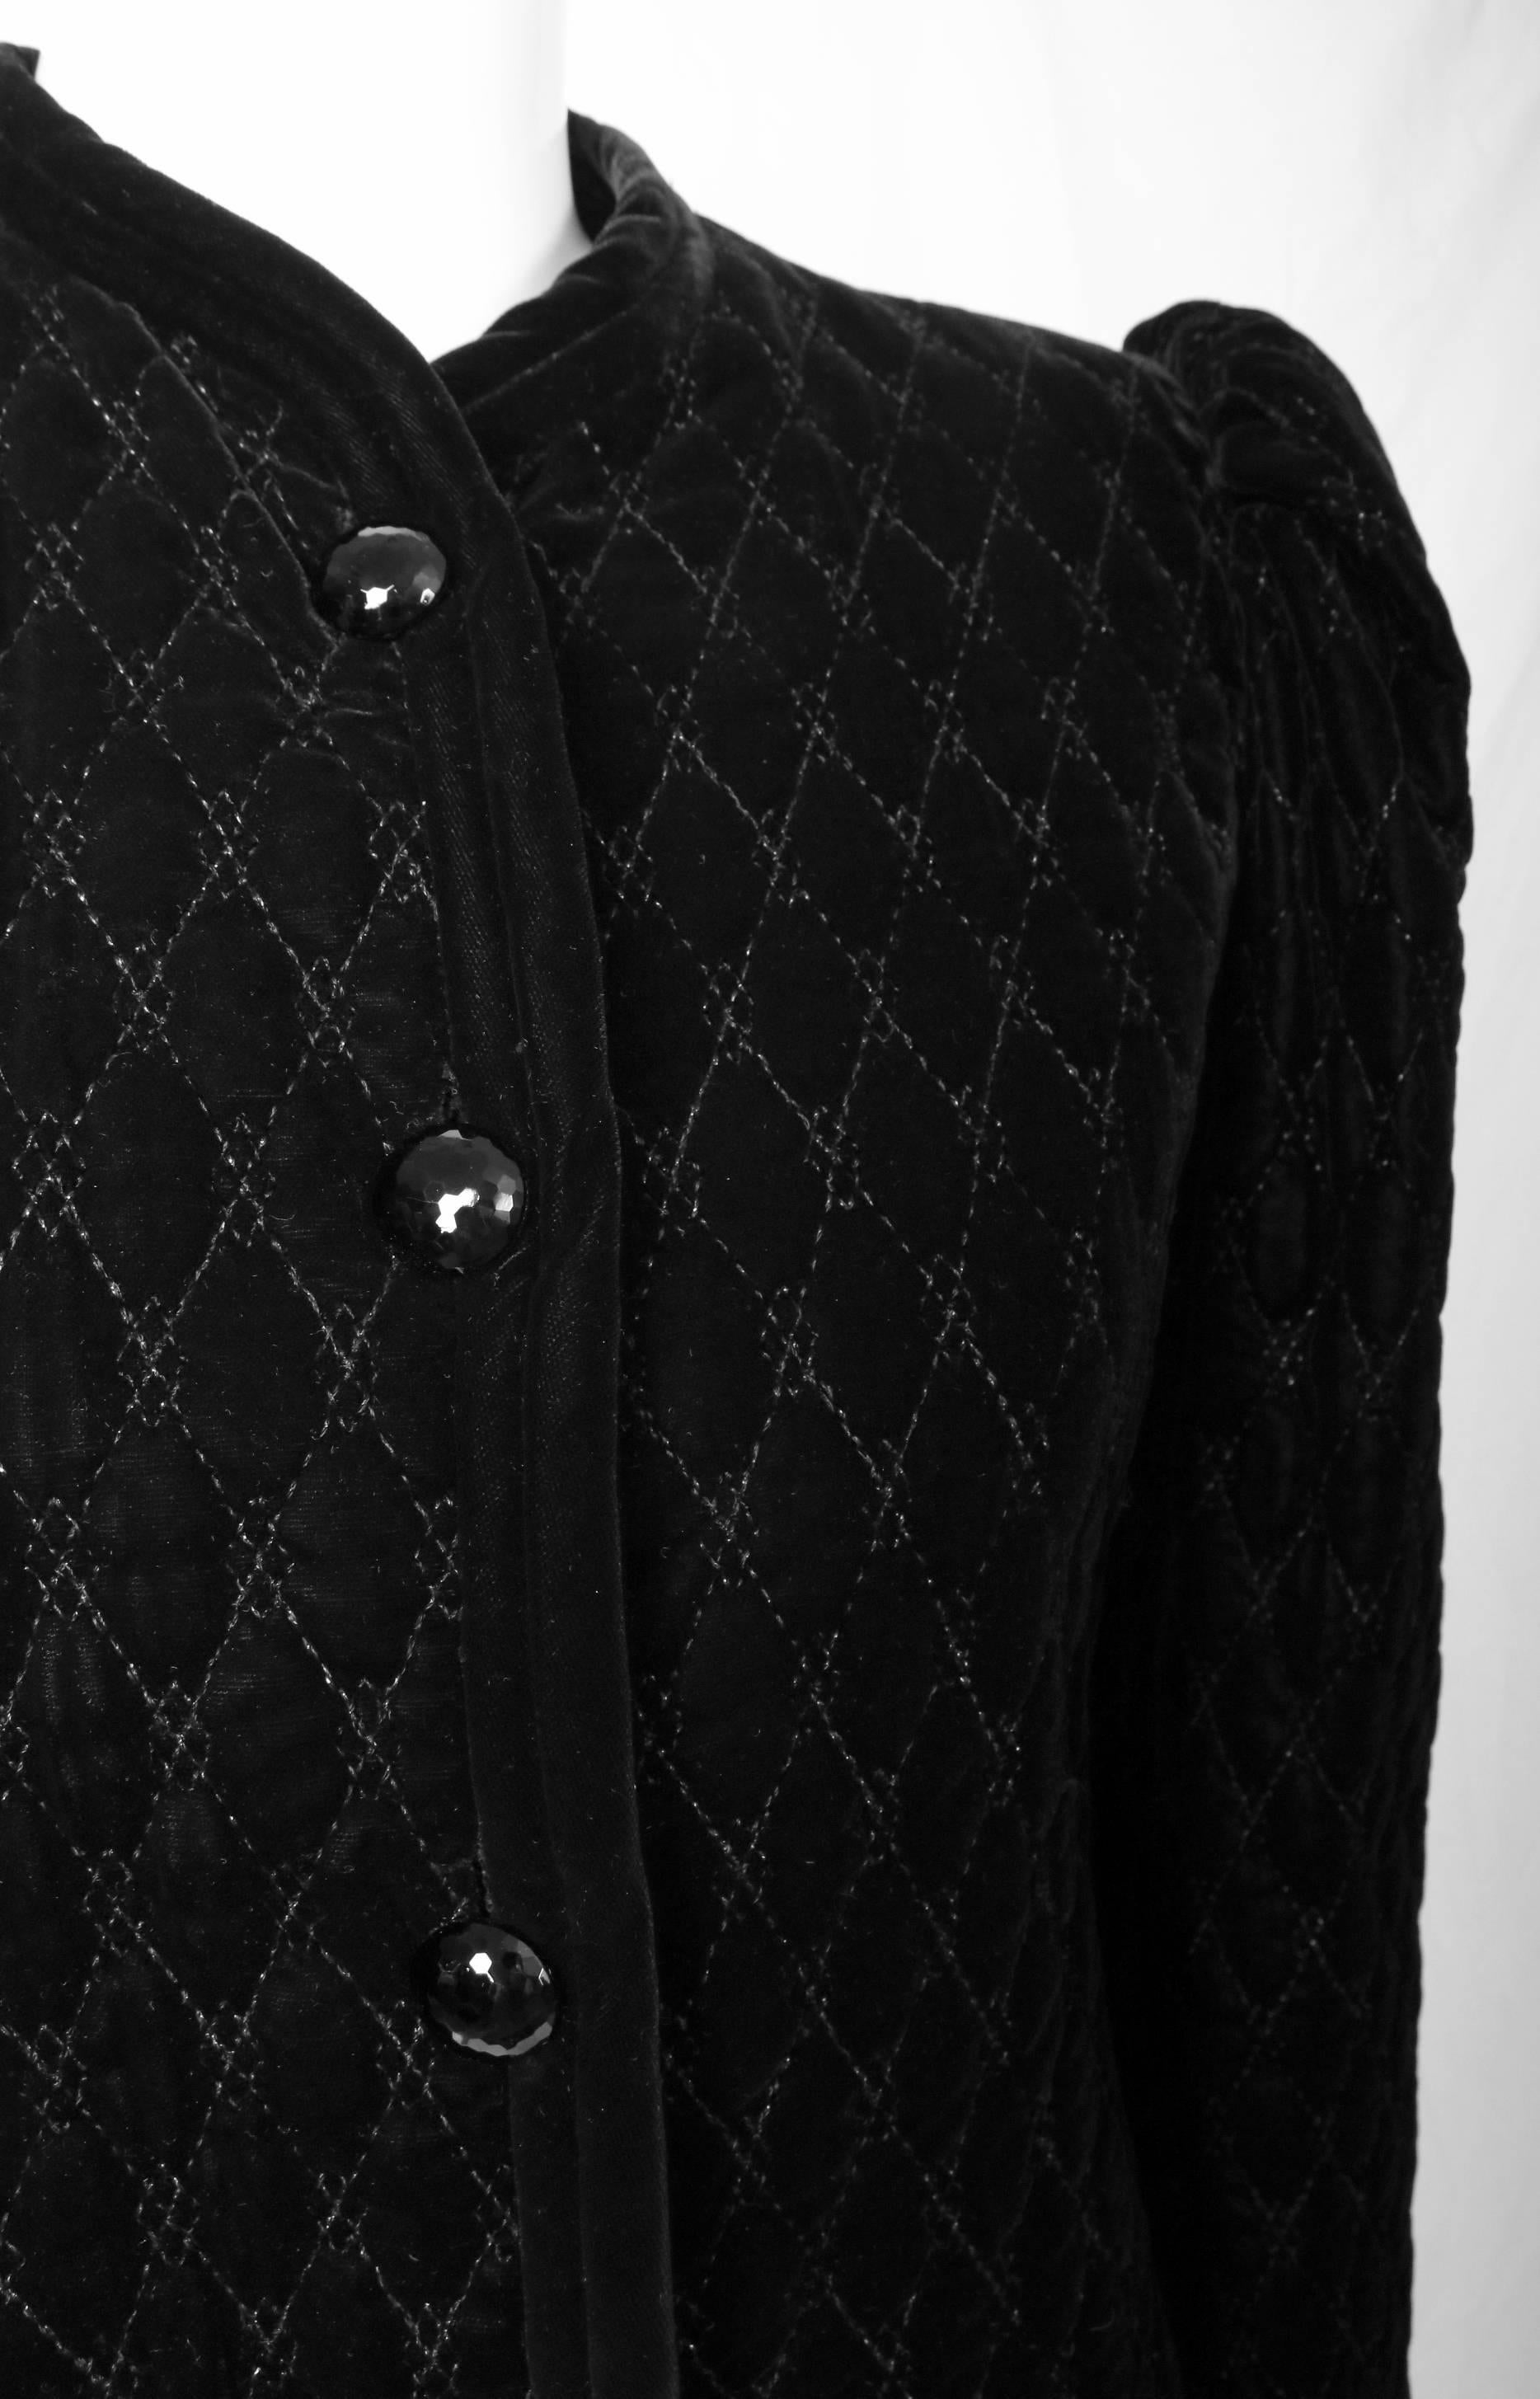 Vintage Yves Saint Laurent black velvet quilted jacket with puffed sleeves and black faceted buttons. Features silk lined interior. Size tag 40. In excellent condition.
MEASUREMENTS:
Shoulders - 15